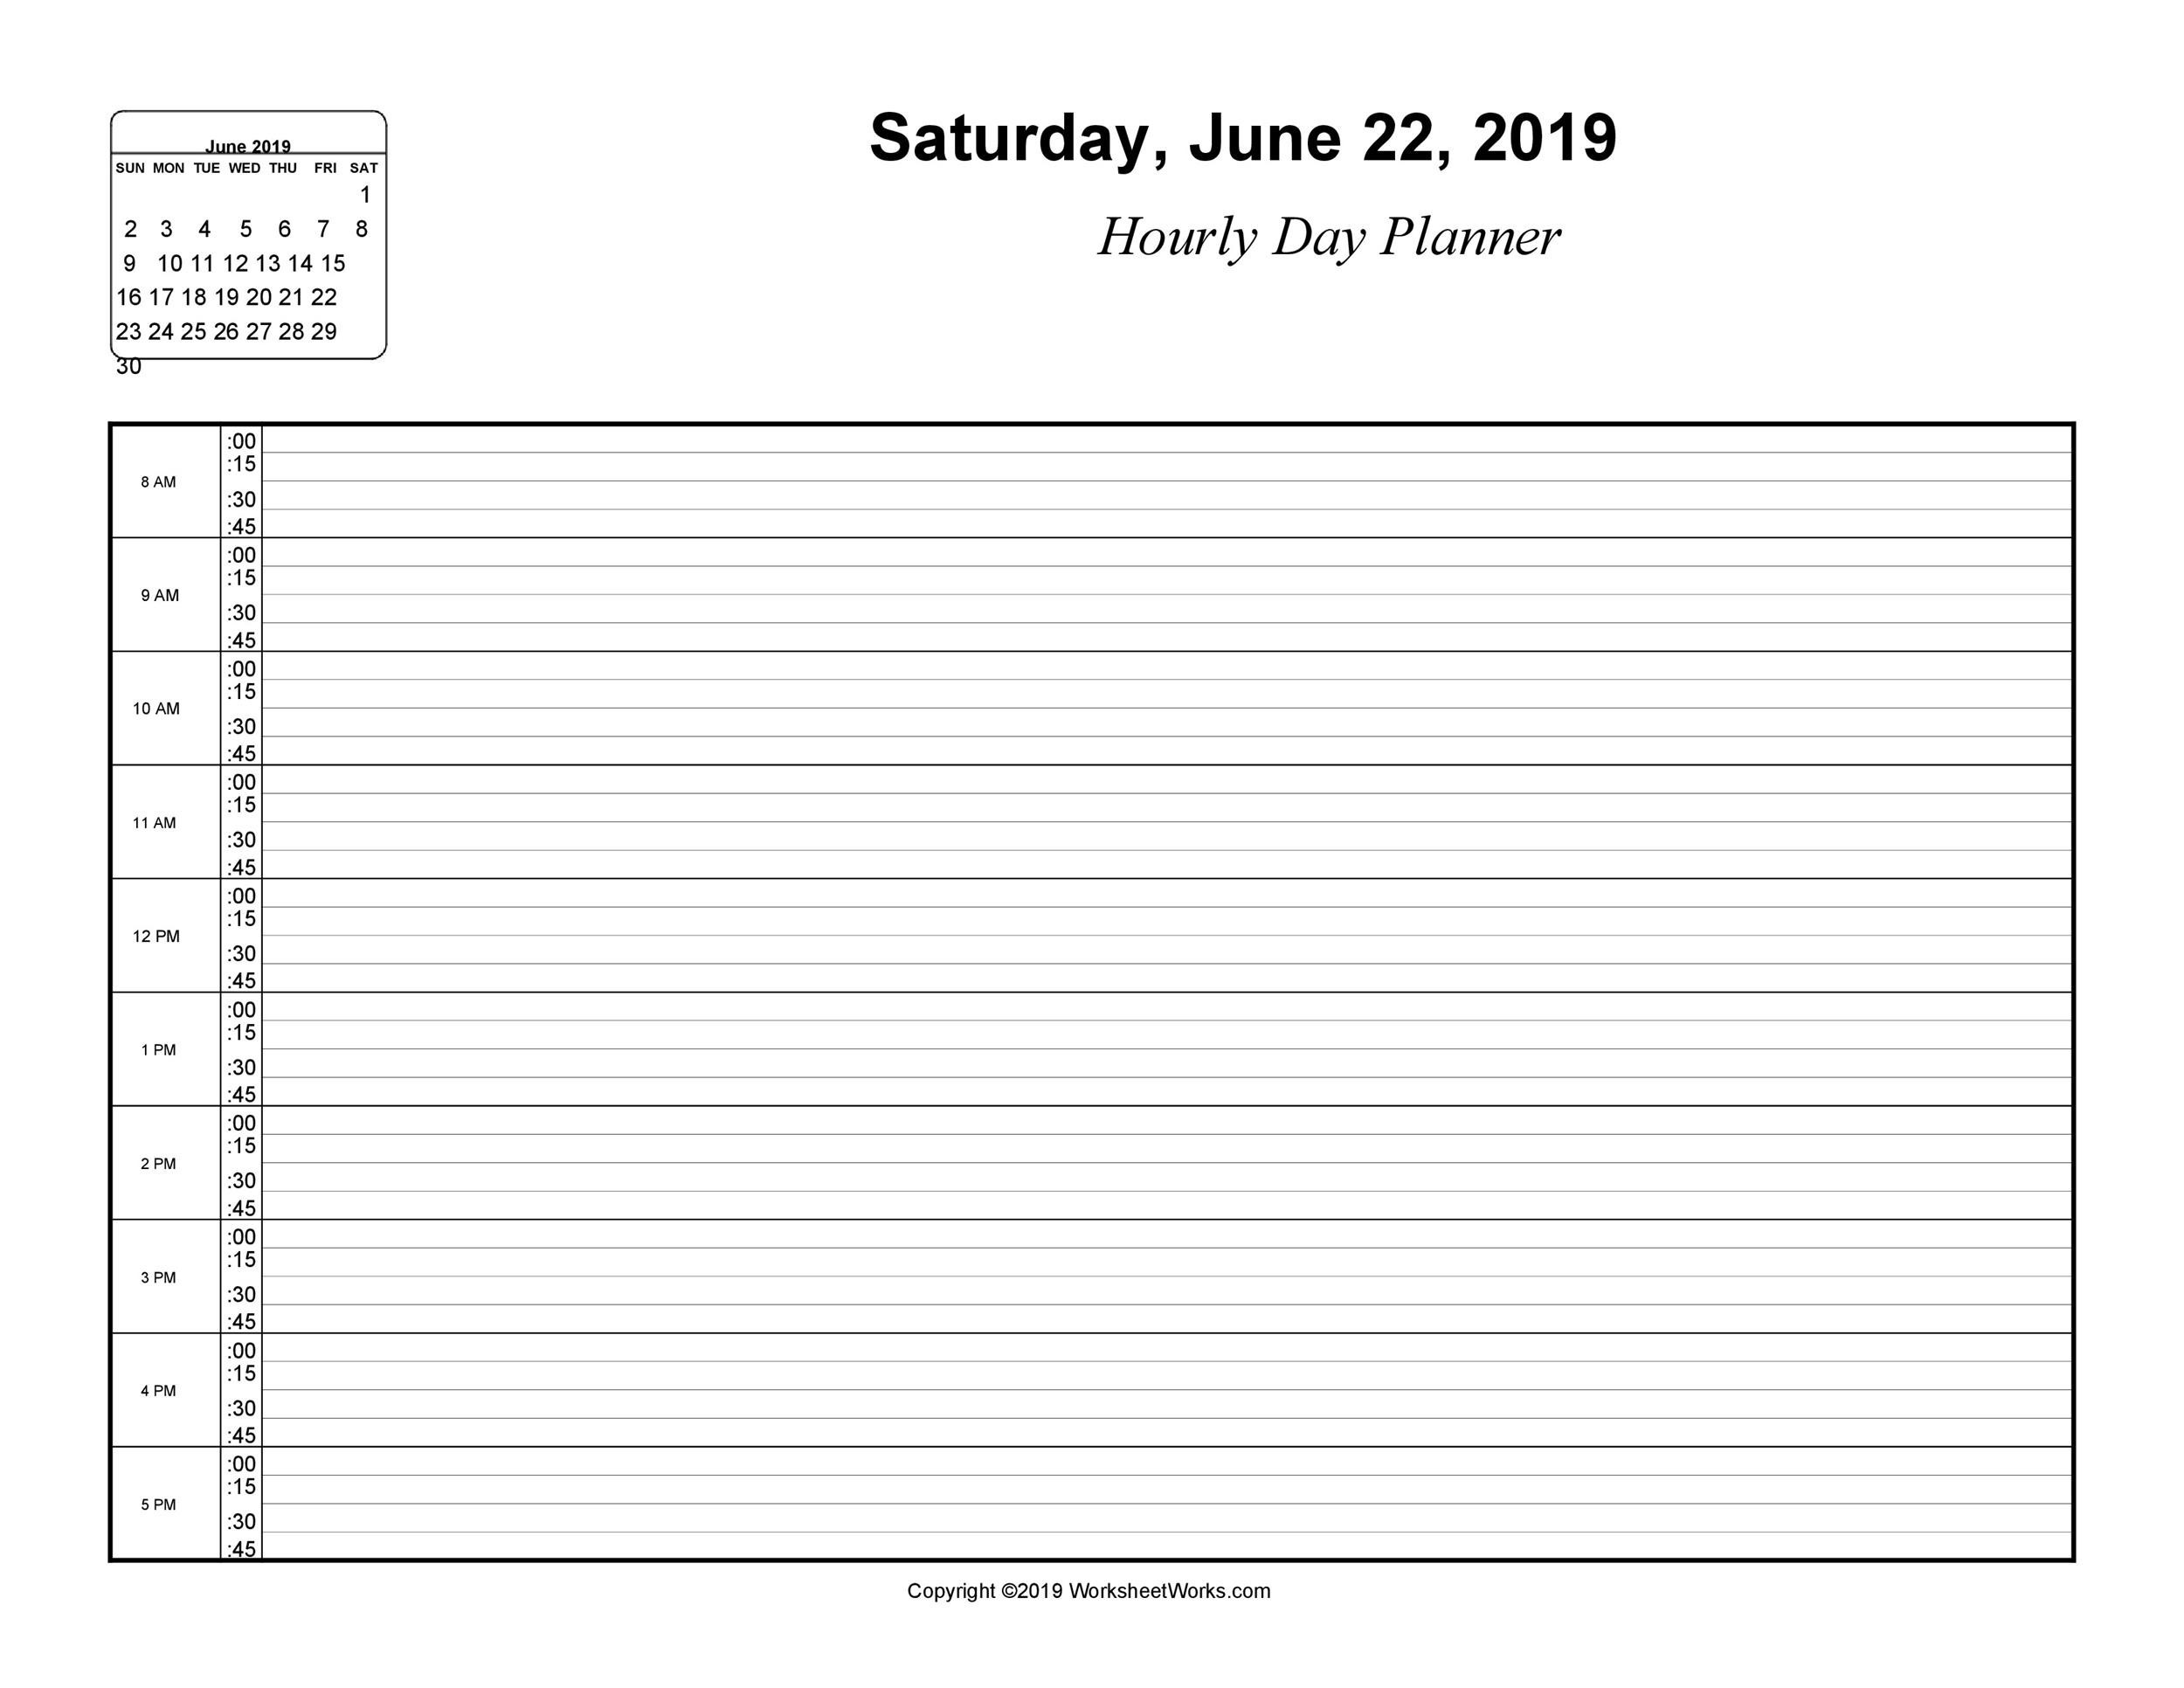 43 Effective Hourly Schedule Templates (Excel & MS Word) ᐅ TemplateLab